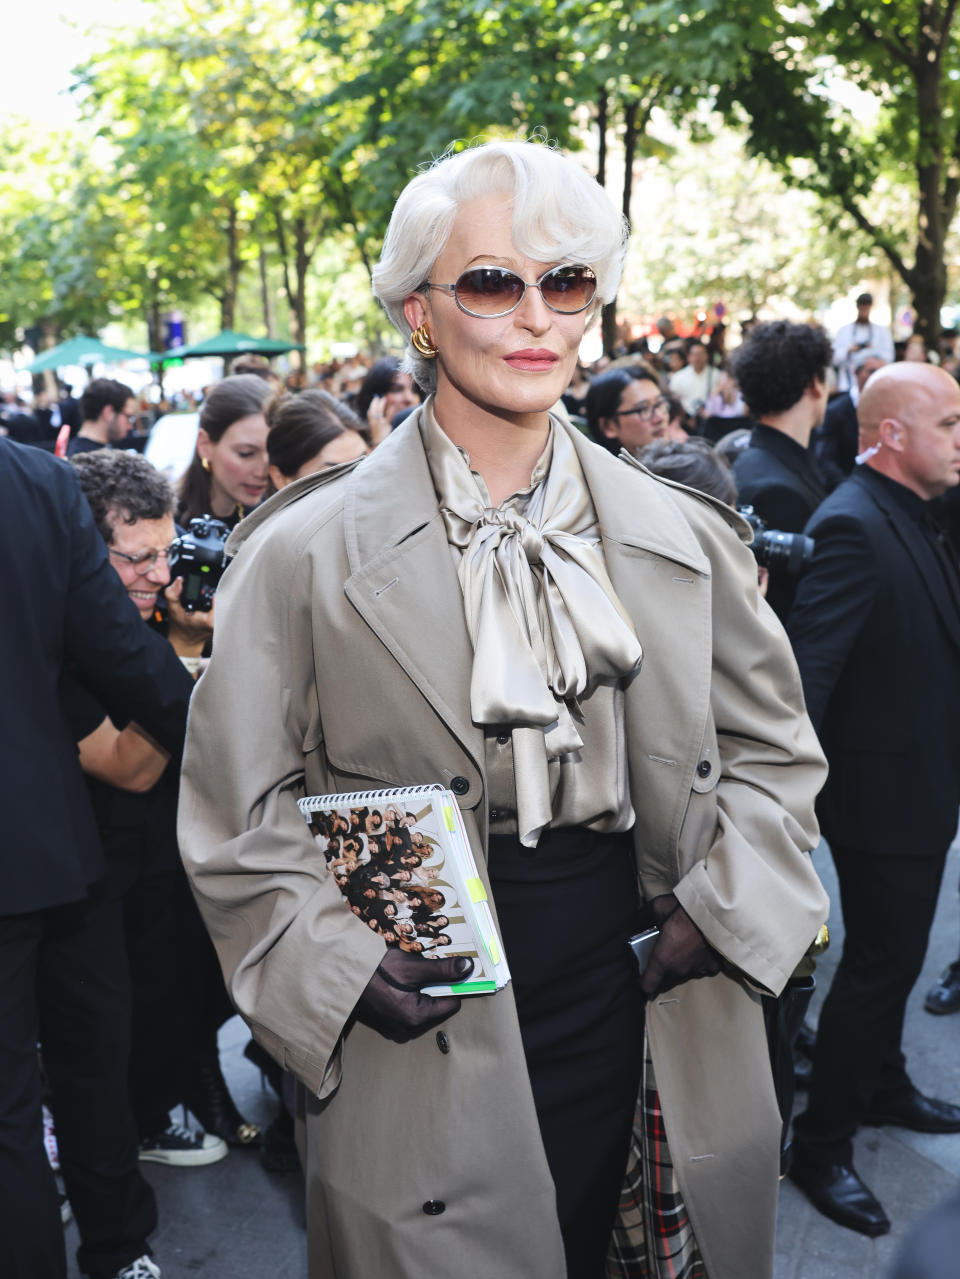 Alexis Stone, styled as Miranda Priestly, wearing a trench coat, silk blouse with a bow, and sunglasses, holding a notebook, amidst a crowd outdoors